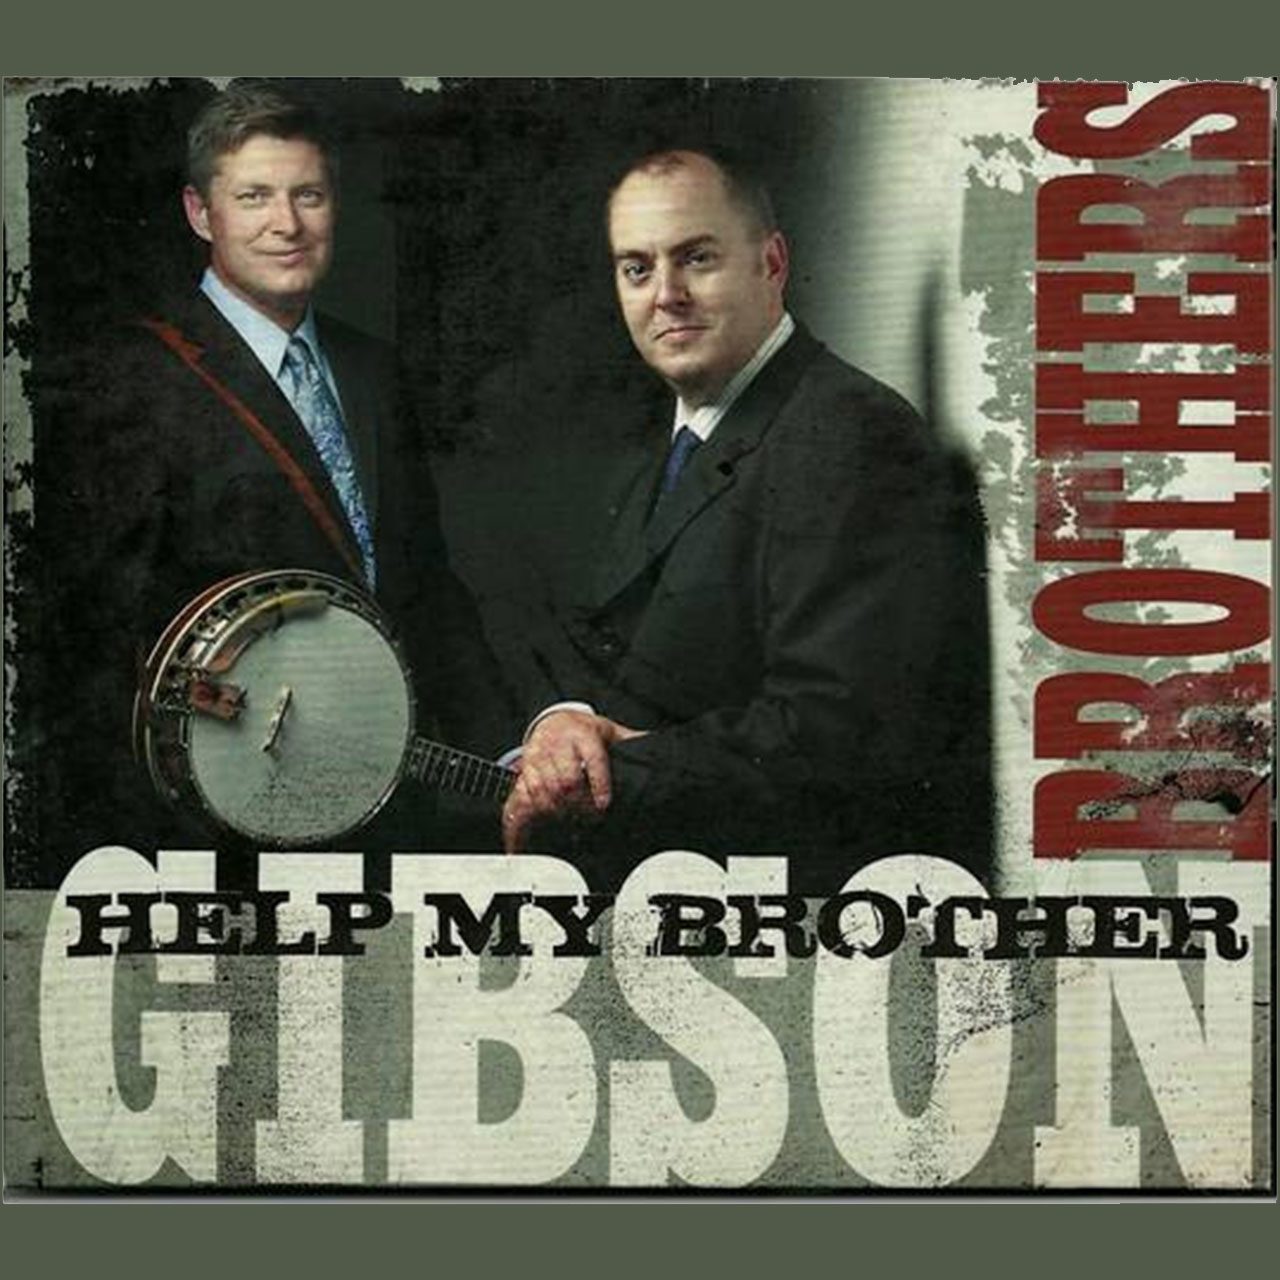 Gibson-Brothers-–-“Help-My-Brother”- cover album